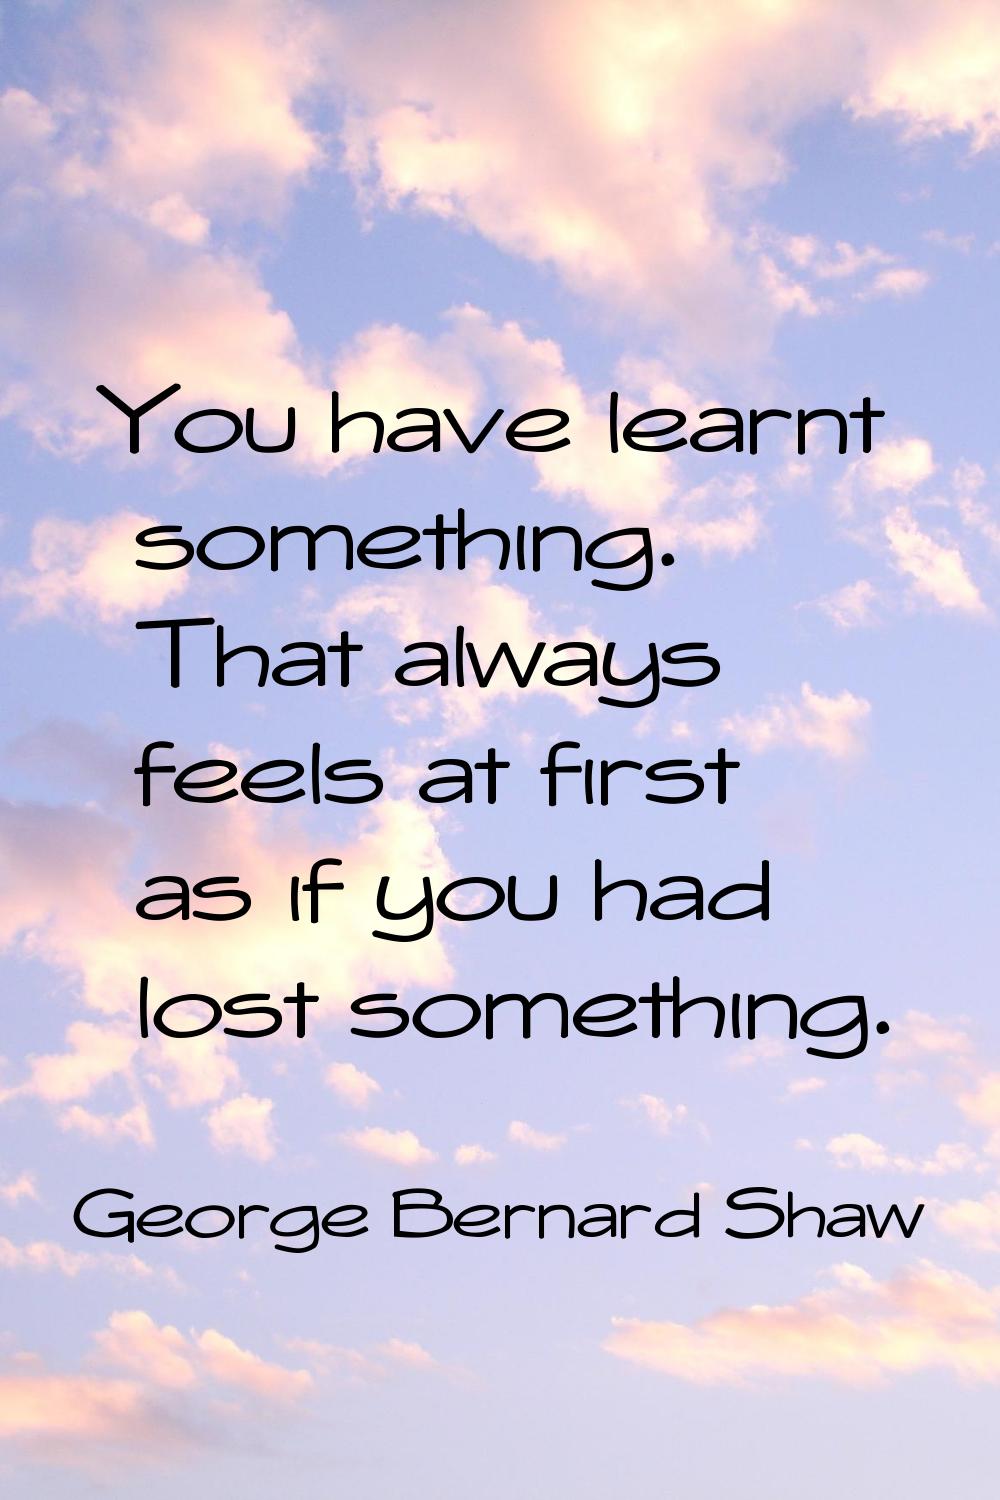 You have learnt something. That always feels at first as if you had lost something.